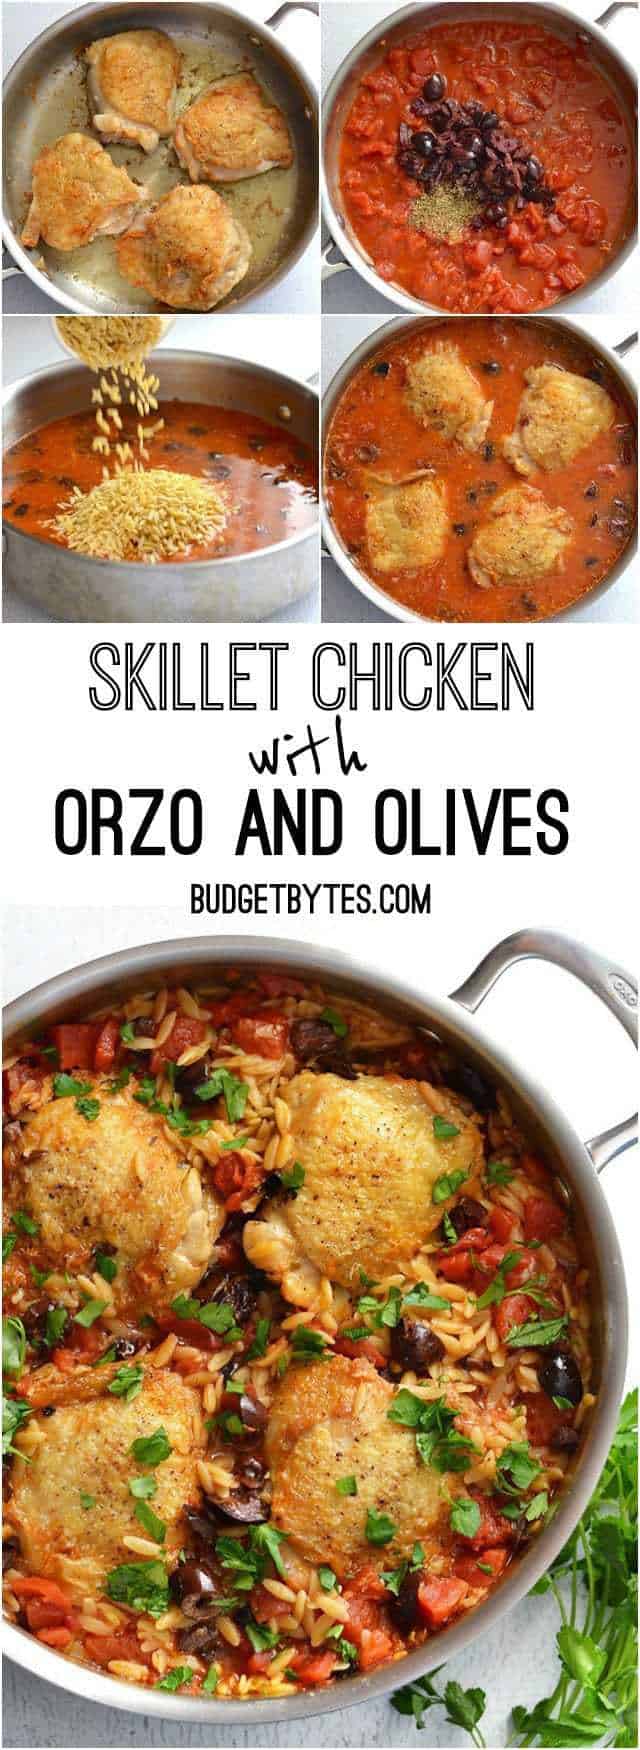 Skillet Chicken with Orzo and Olives - BudgetBytes.com